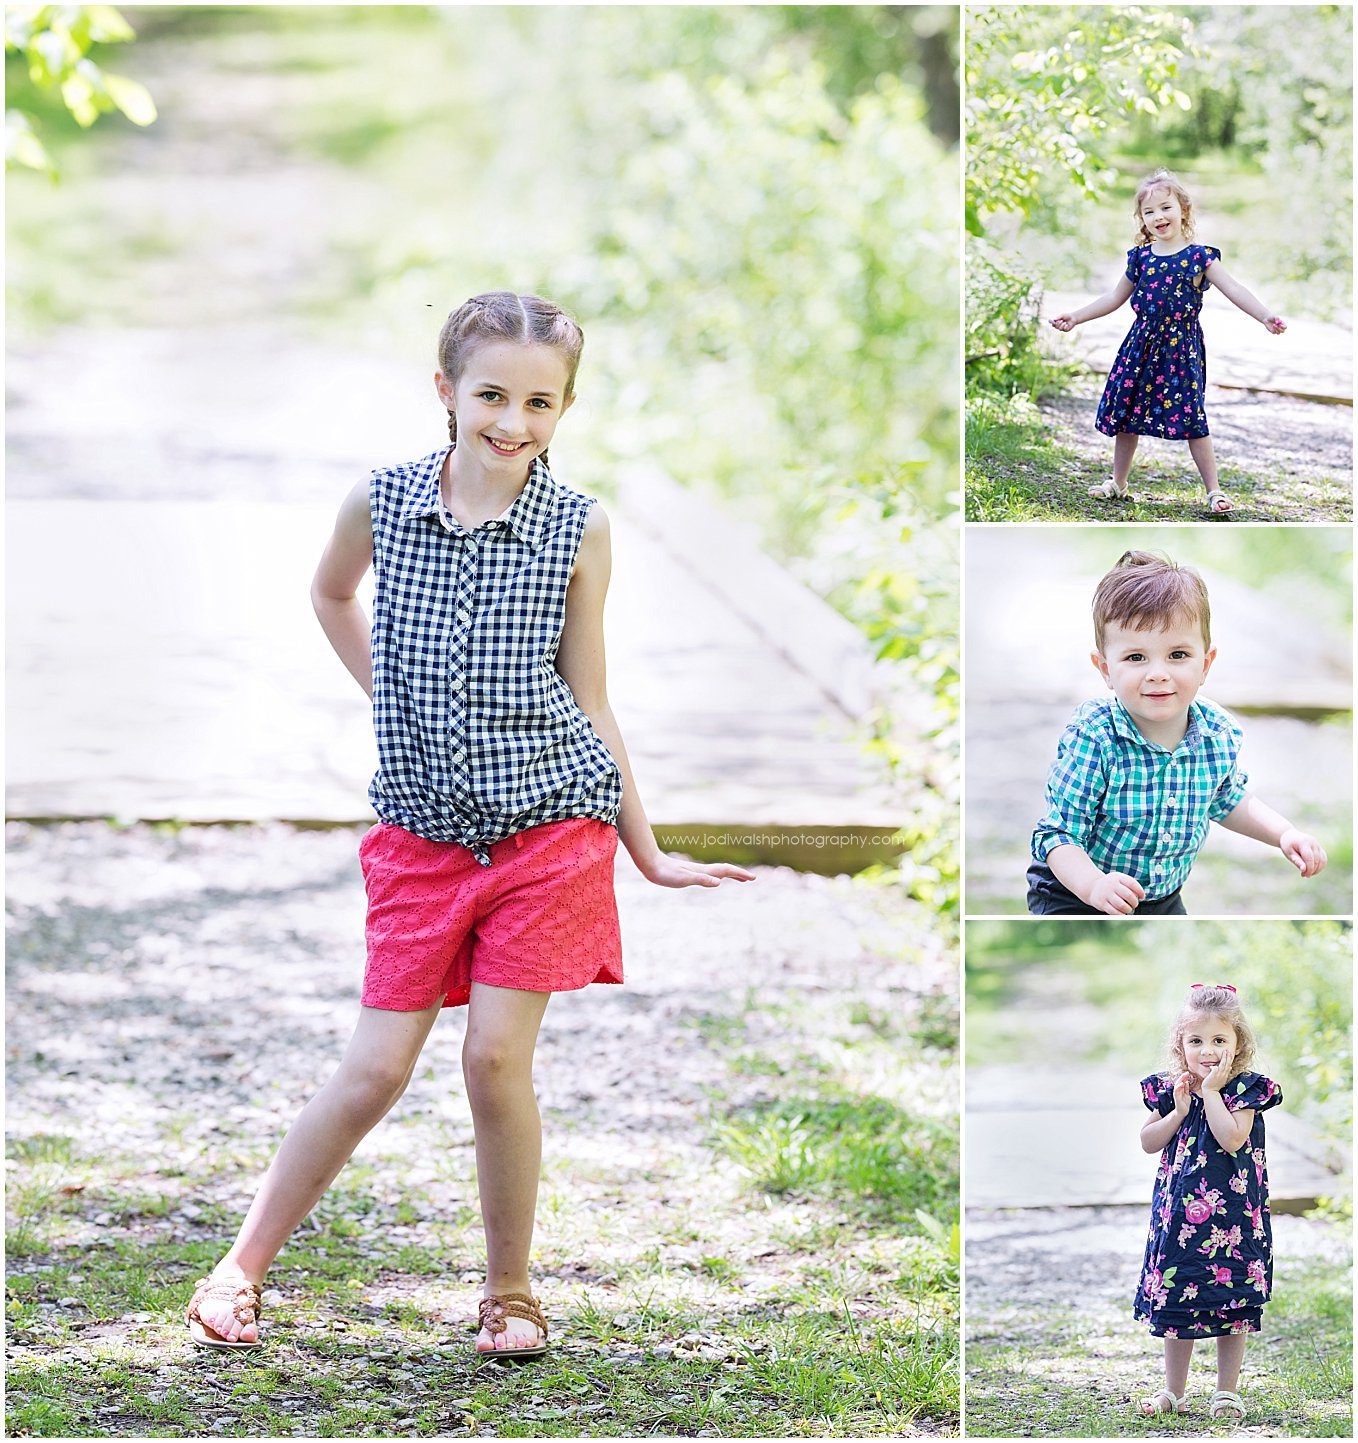 images of kids in their spring outfits on a walking trail in Moraine State Park. It's spring and they're all wearing shorts and spring dresses.